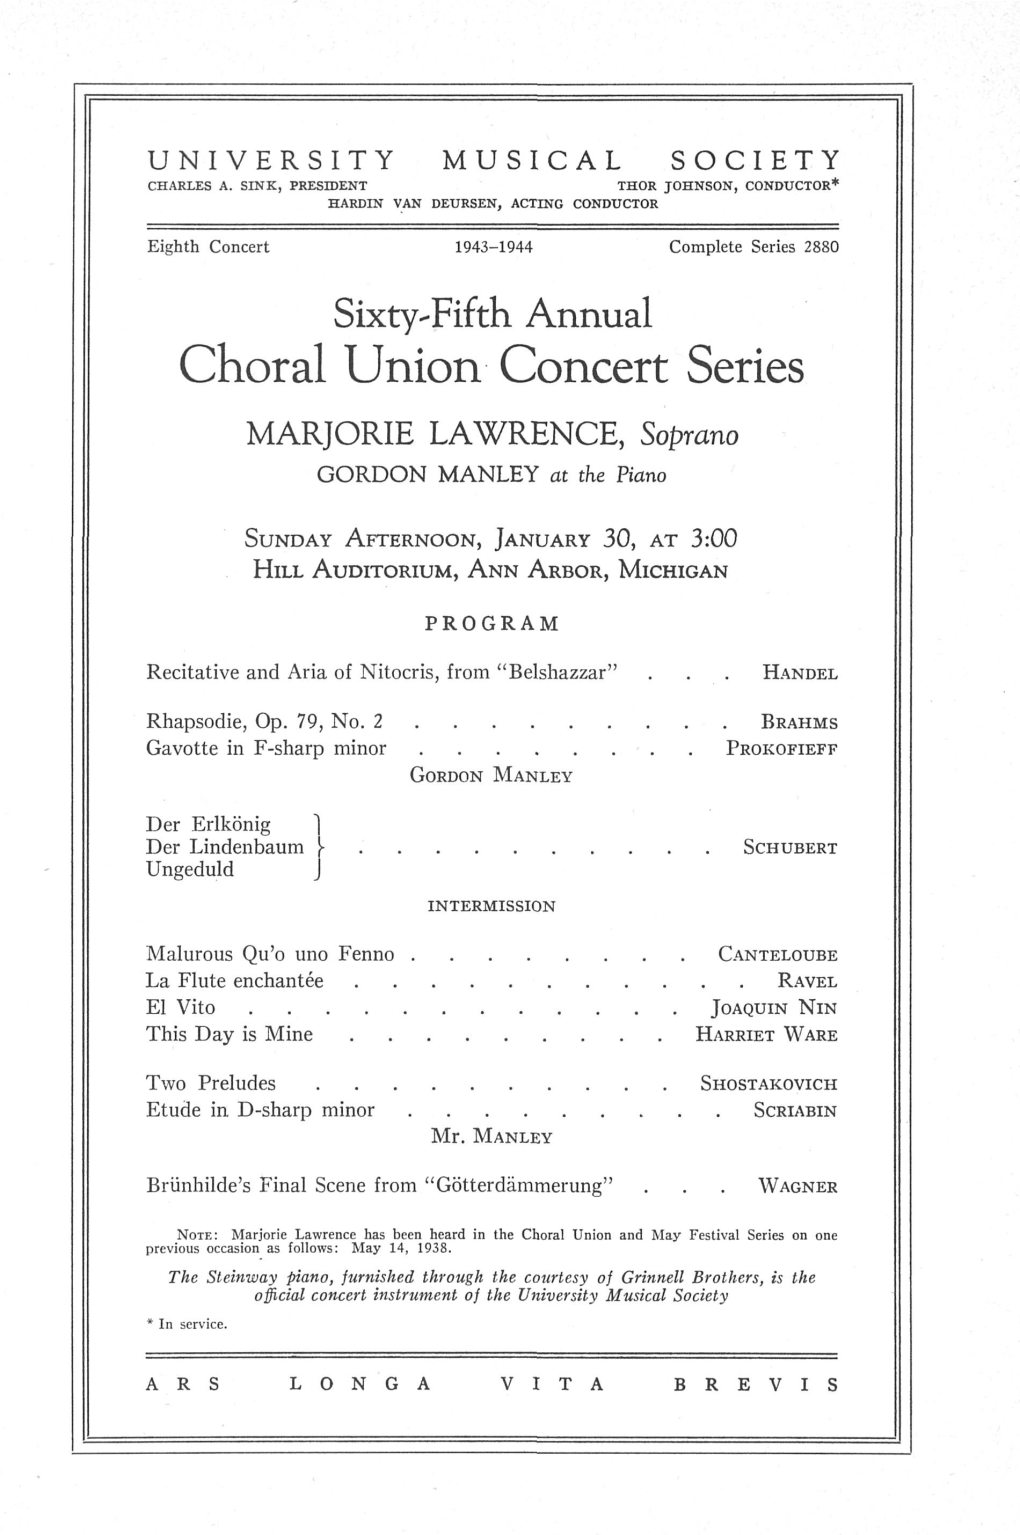 Choral Union Concert Series MARJORIE LAWRENCE, Soprano GORDON MANLEY at the Piano